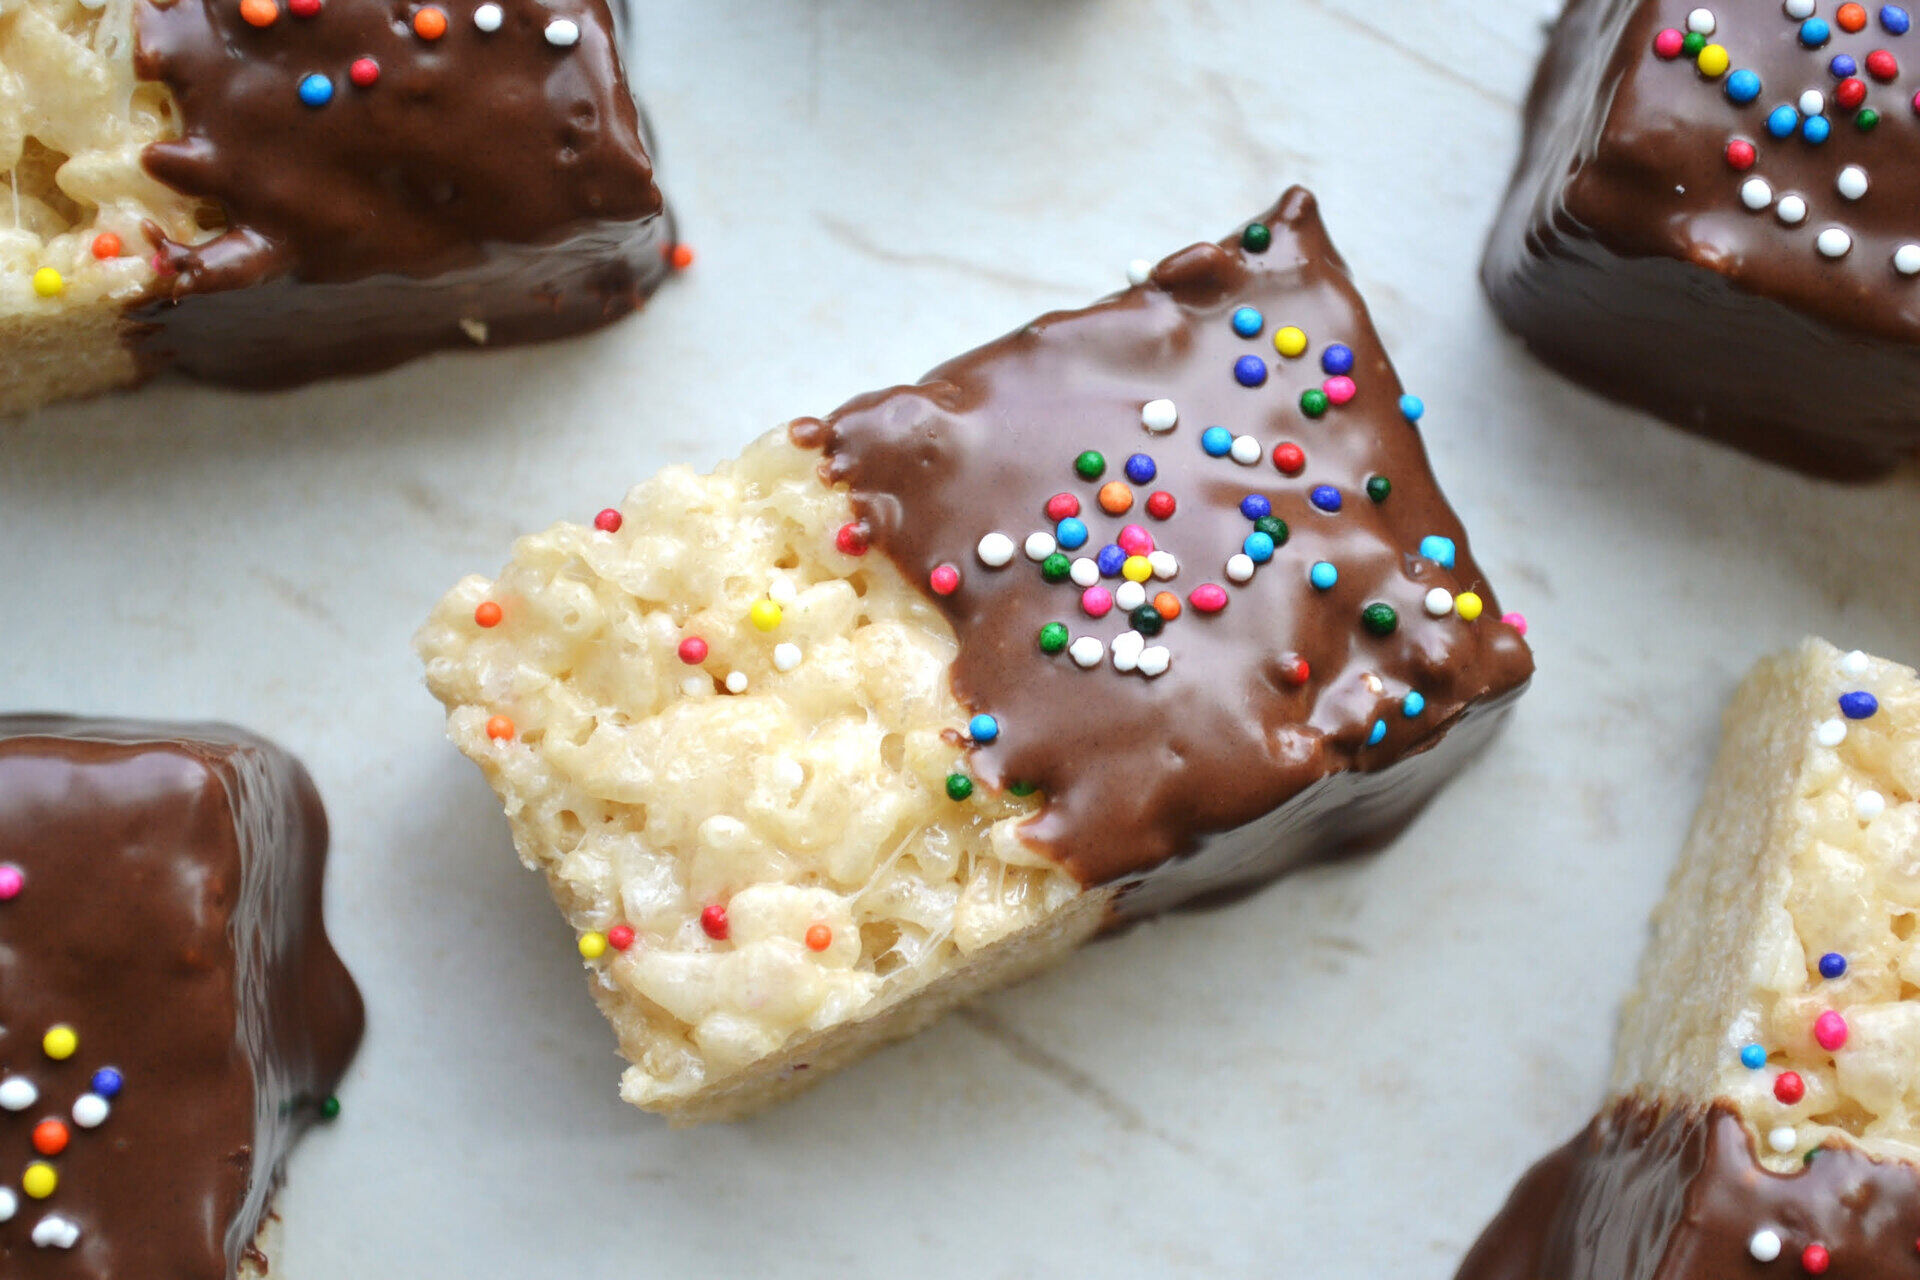 How To Store Chocolate Covered Rice Krispie Treats